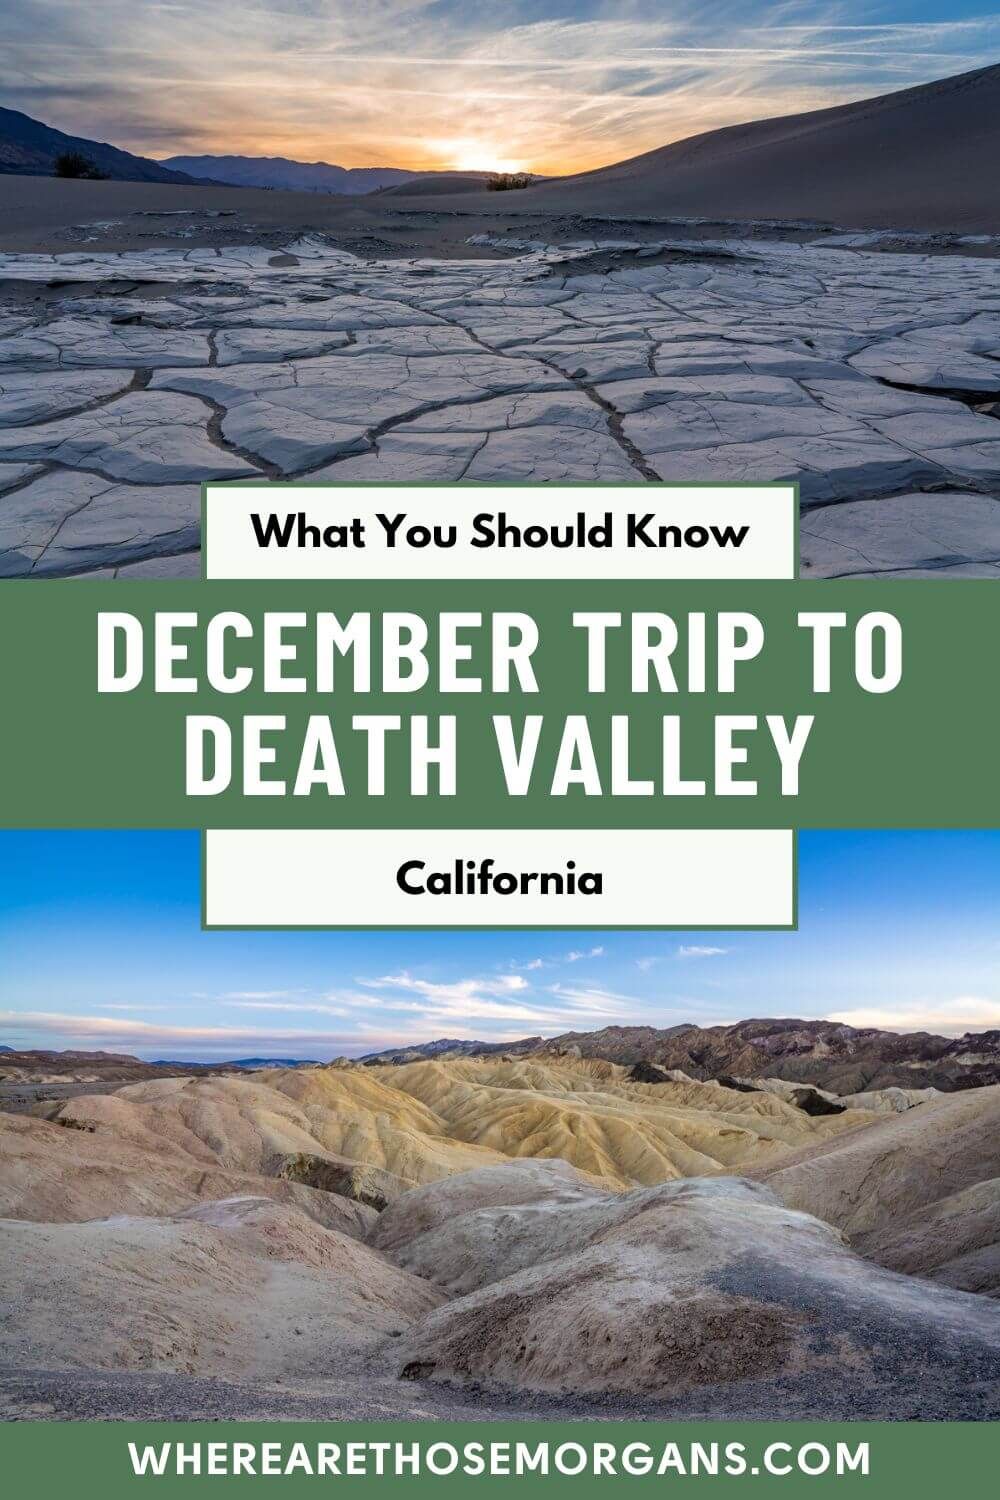 The 10 most important things you should know before visiting Death Valley National Park in December, including crowds, weather and hiking in winter.